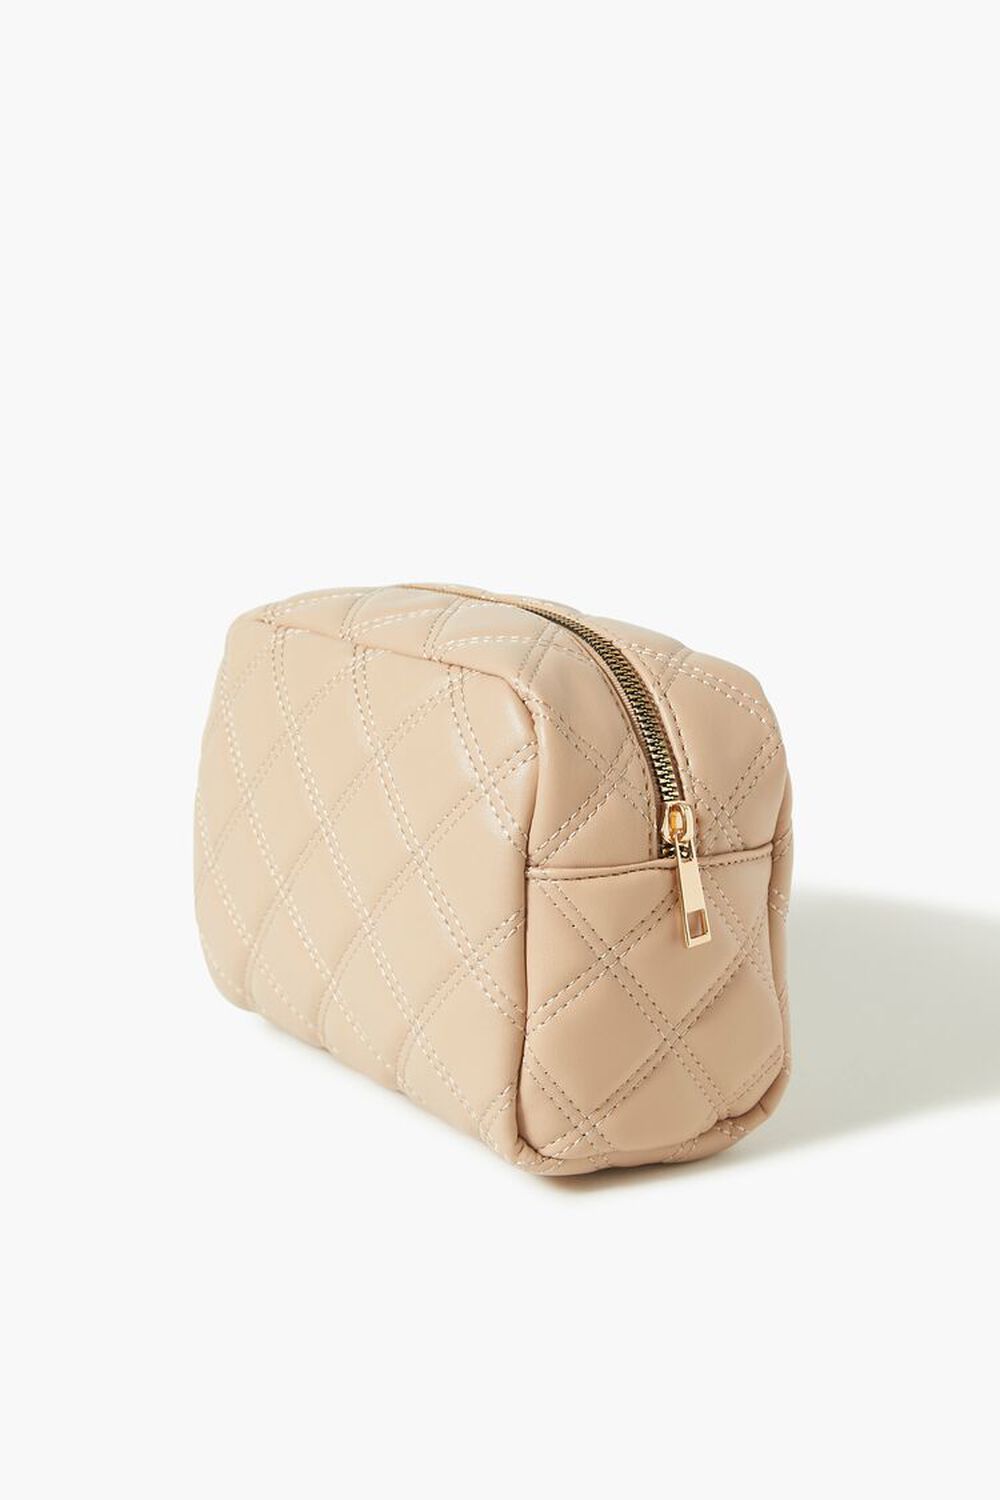 Quilted Faux Leather Makeup Bag, image 2